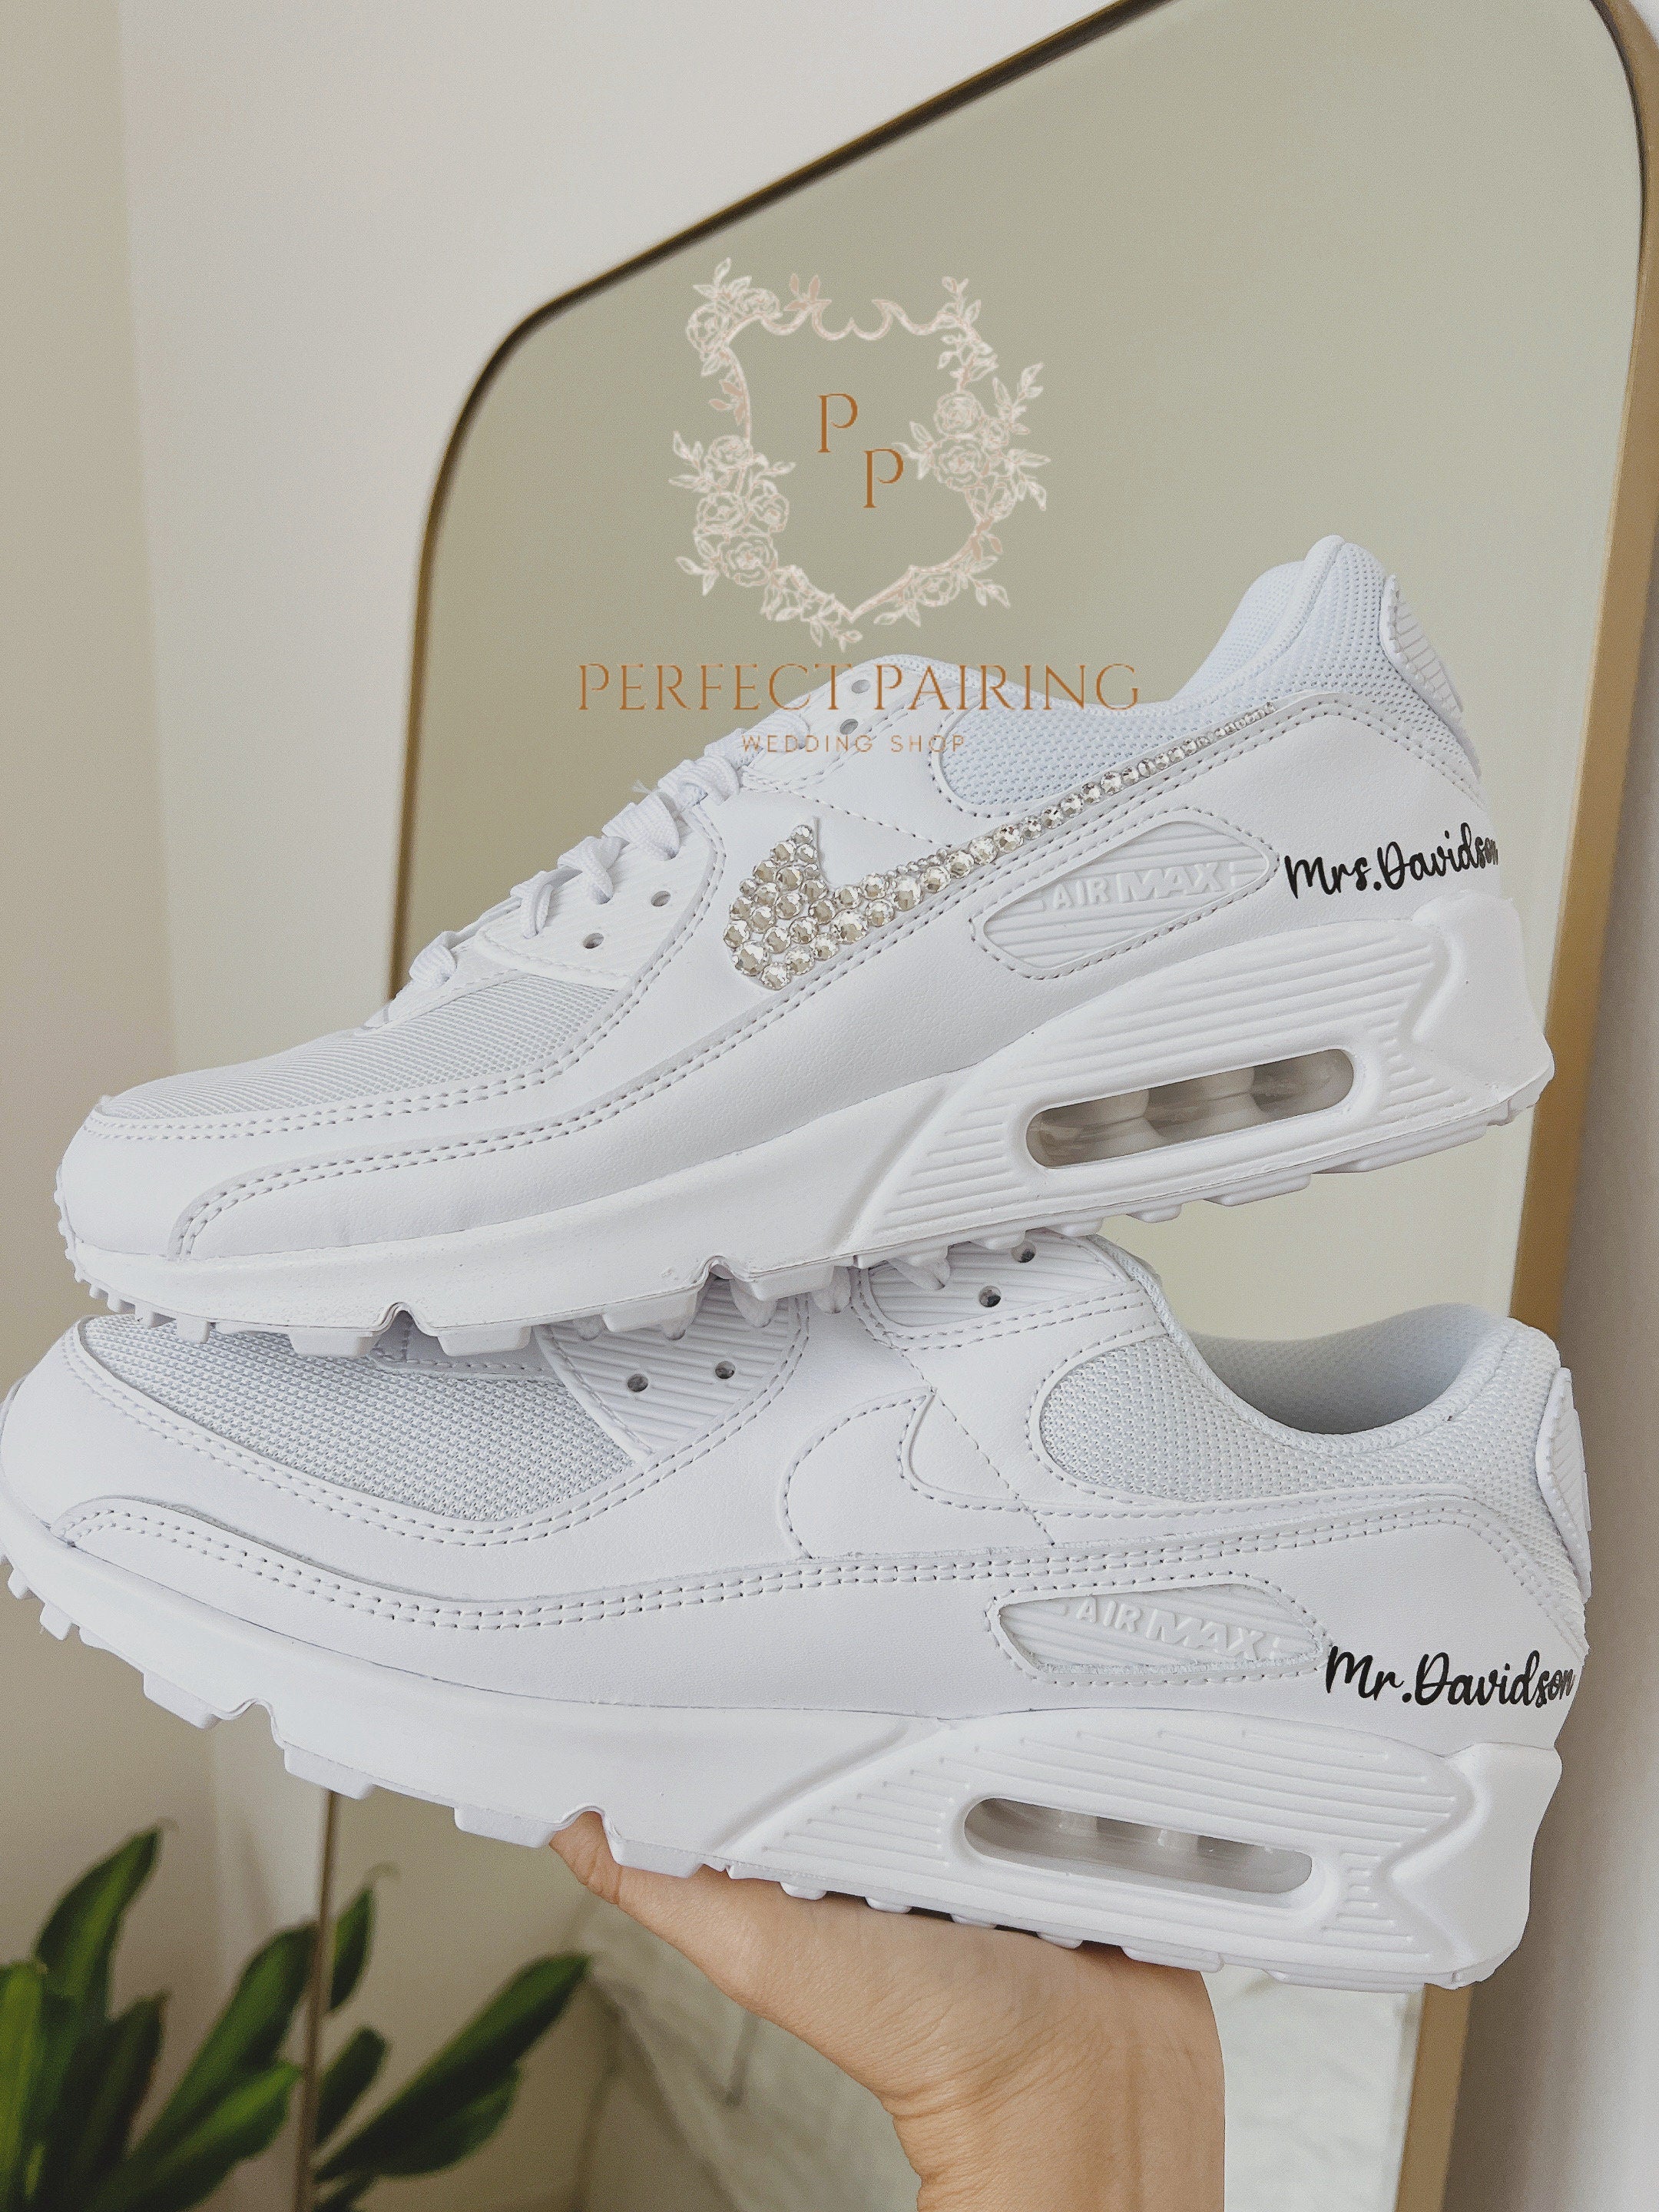 Wedding Sneakers For Mrs And Mr Air Max 90 Nike Wedding Custom Shoes For Bride And Groom Rhinestones